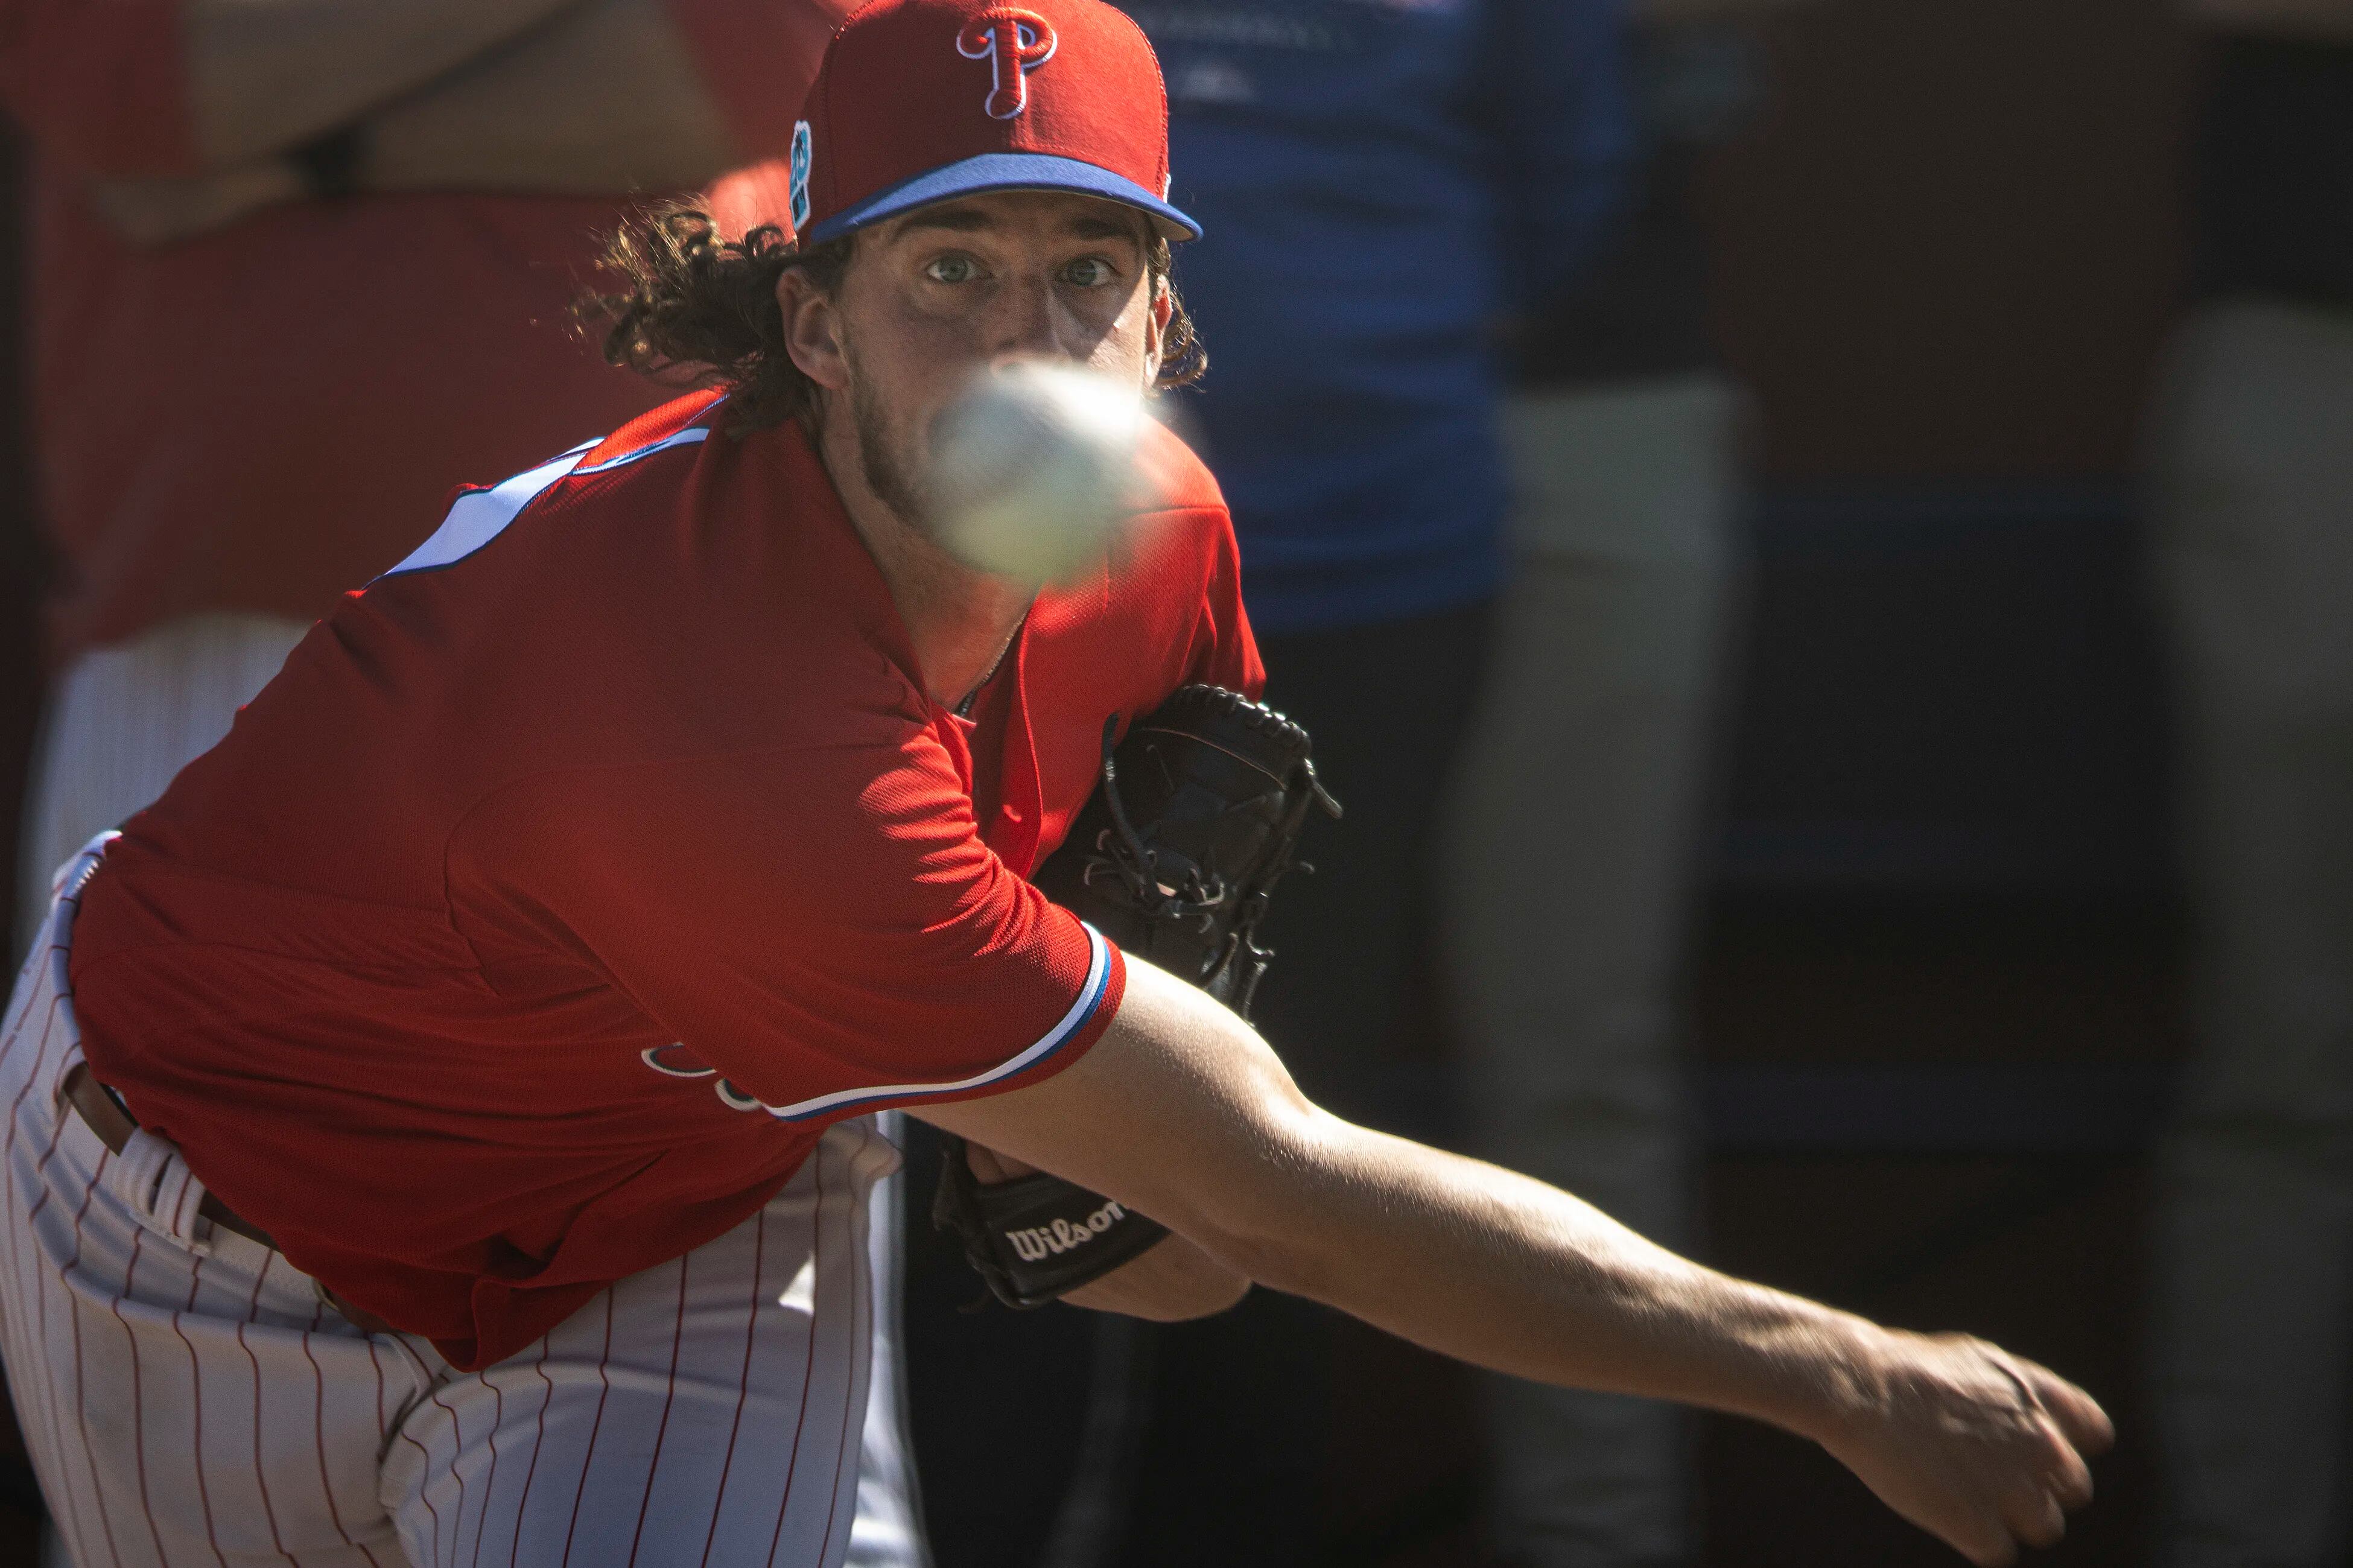 Phillies spring training 2019: Schedule, how to watch and stream